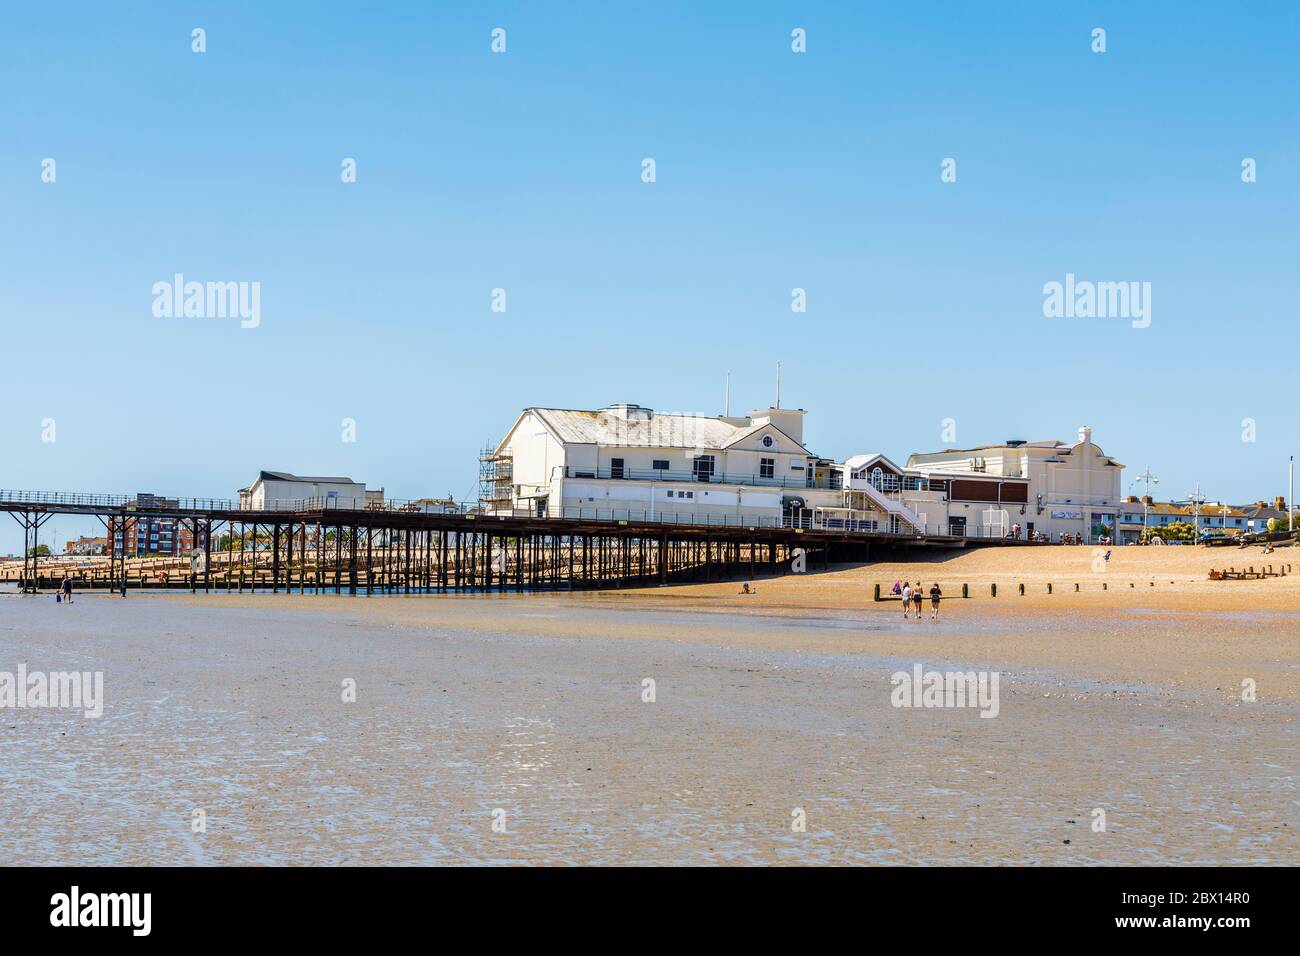 The pier and part sandy part stony shingle beach on the seafront at Bognor Regis, a seaside town in West Sussex, south coast England on a sunny day Stock Photo